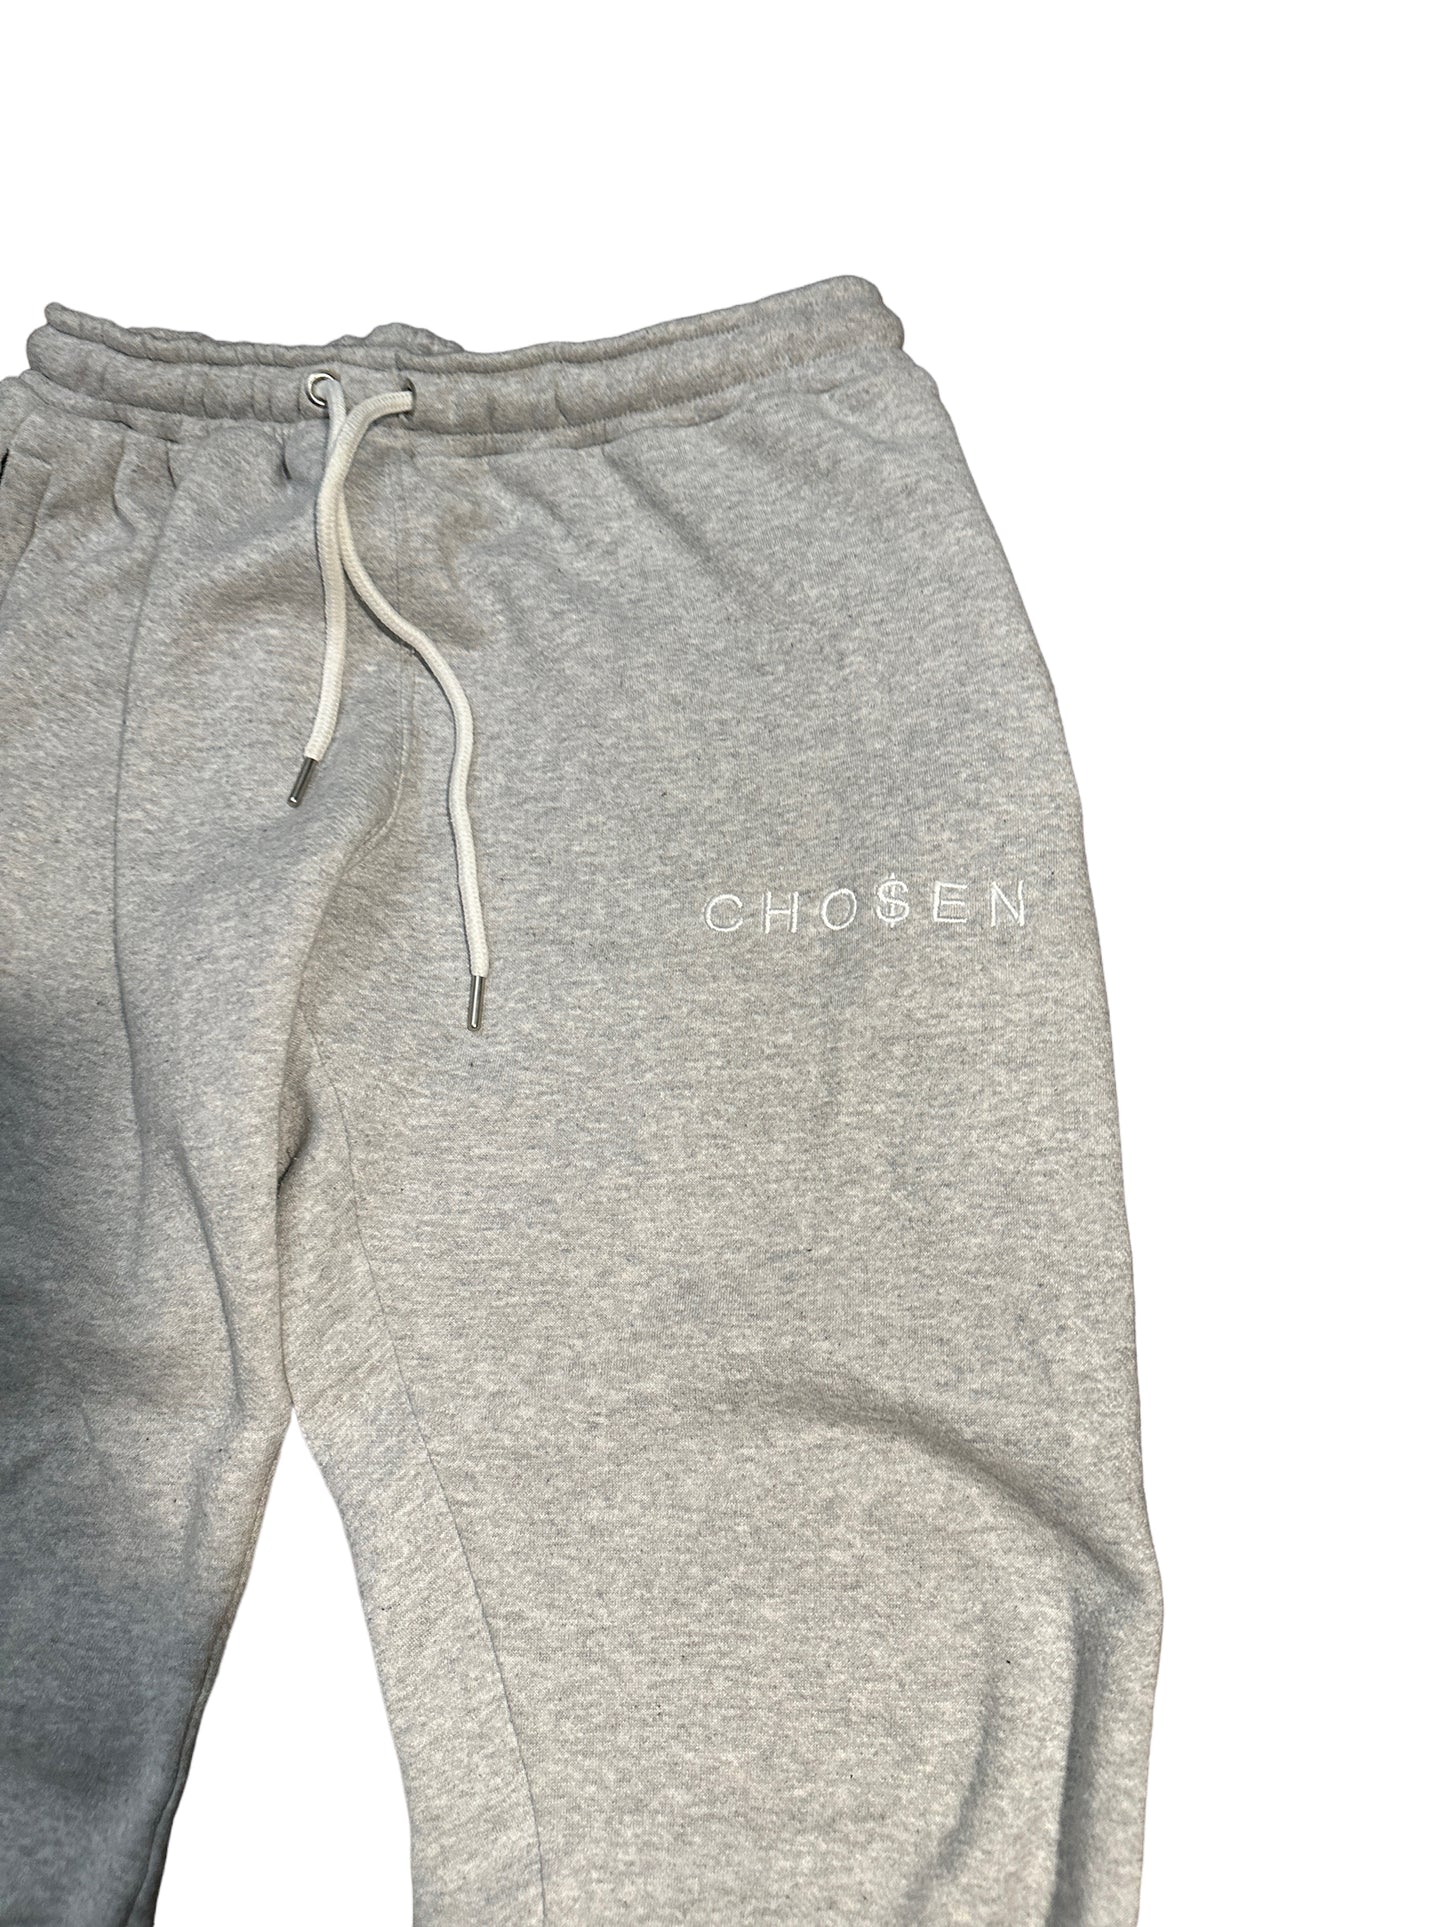 Cho$en Sweat Suit: Luxe Layered Grey Edition Top & Bottom -  Inspired  By All